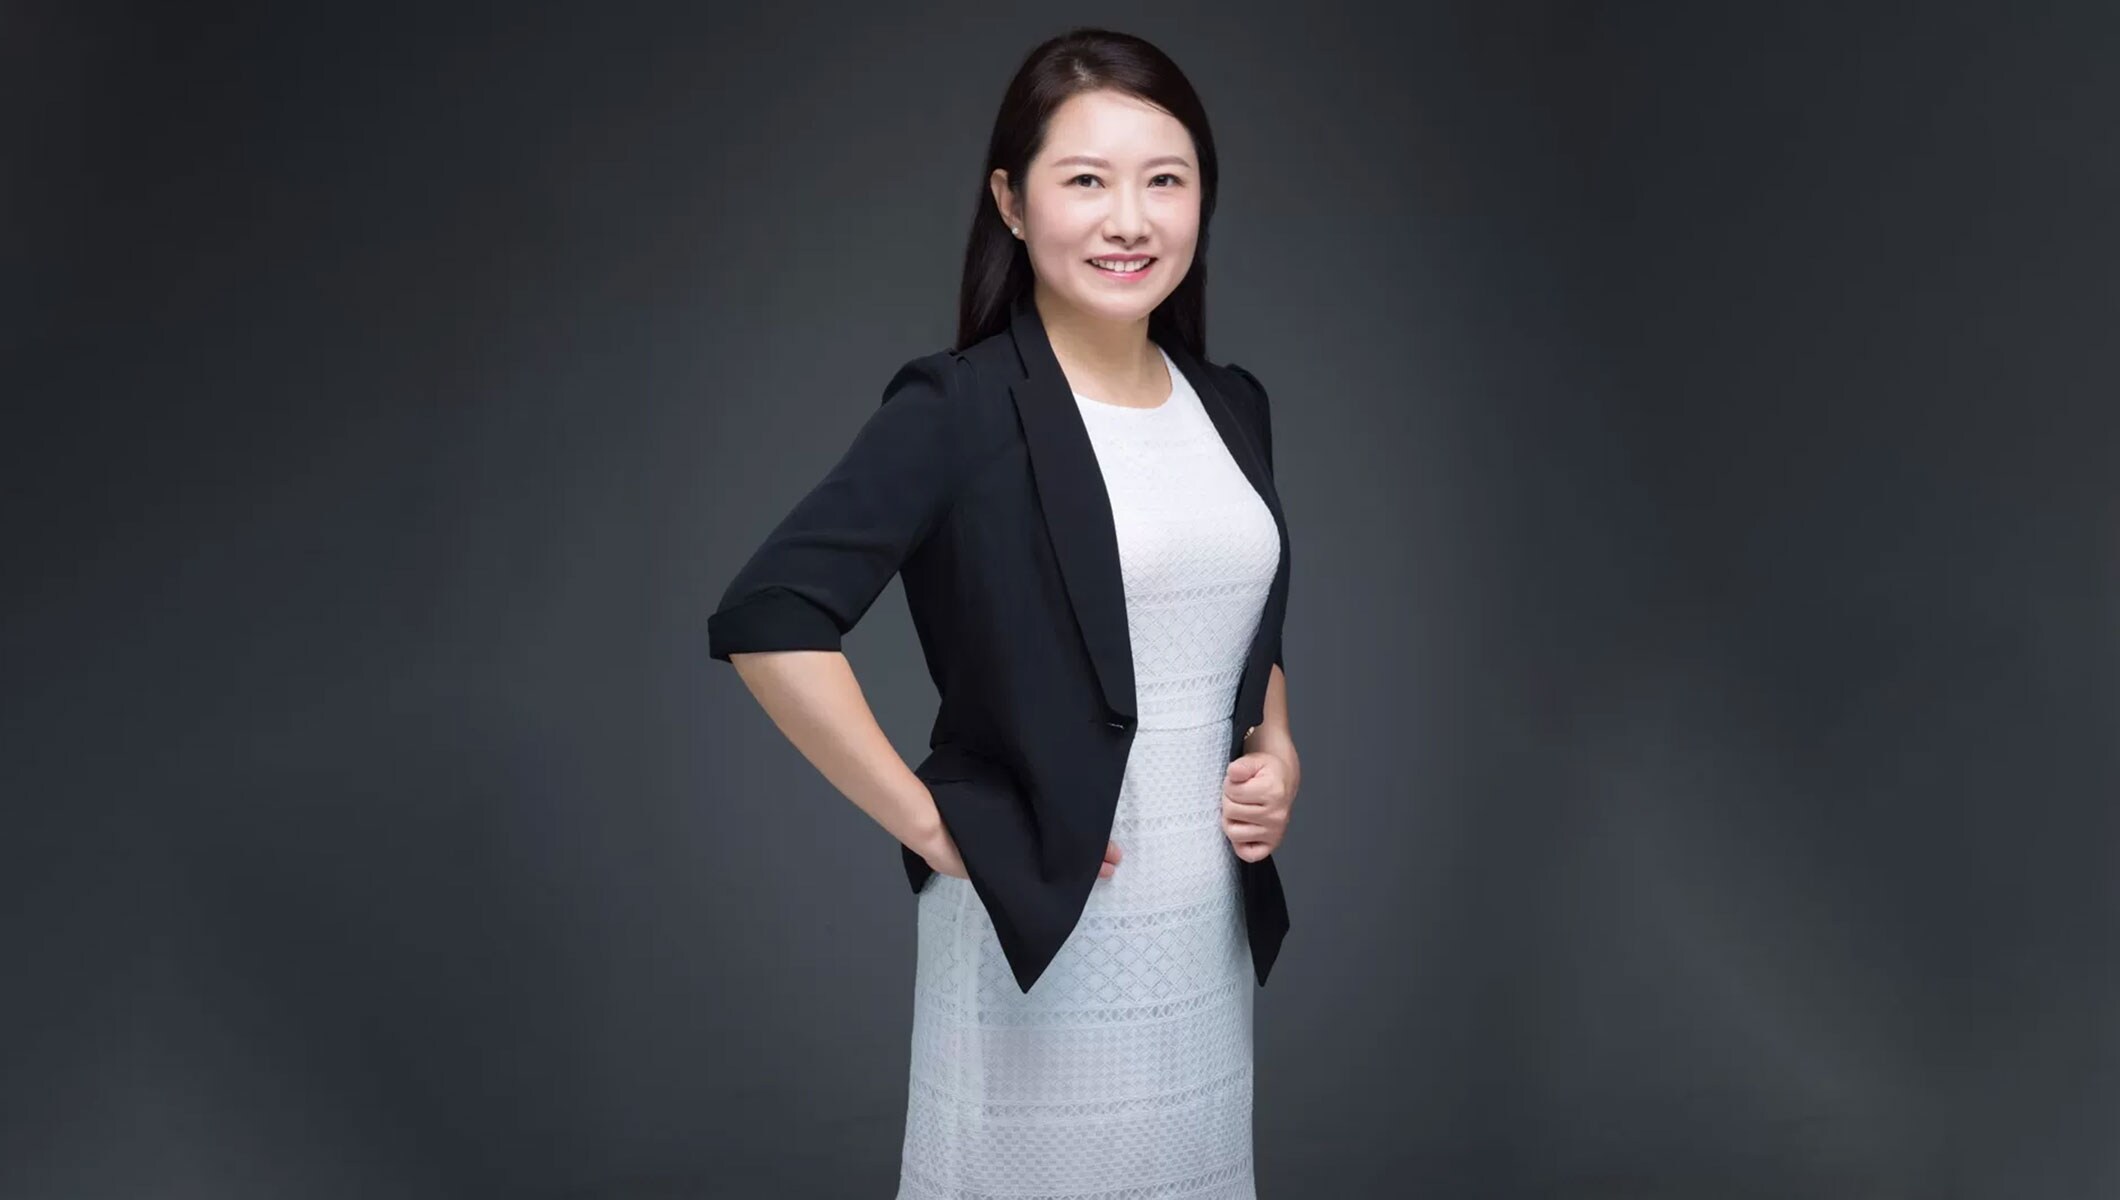 Alibaba’s Selina Yuan: “The Olympic Games are one of the most powerful platforms for equality”